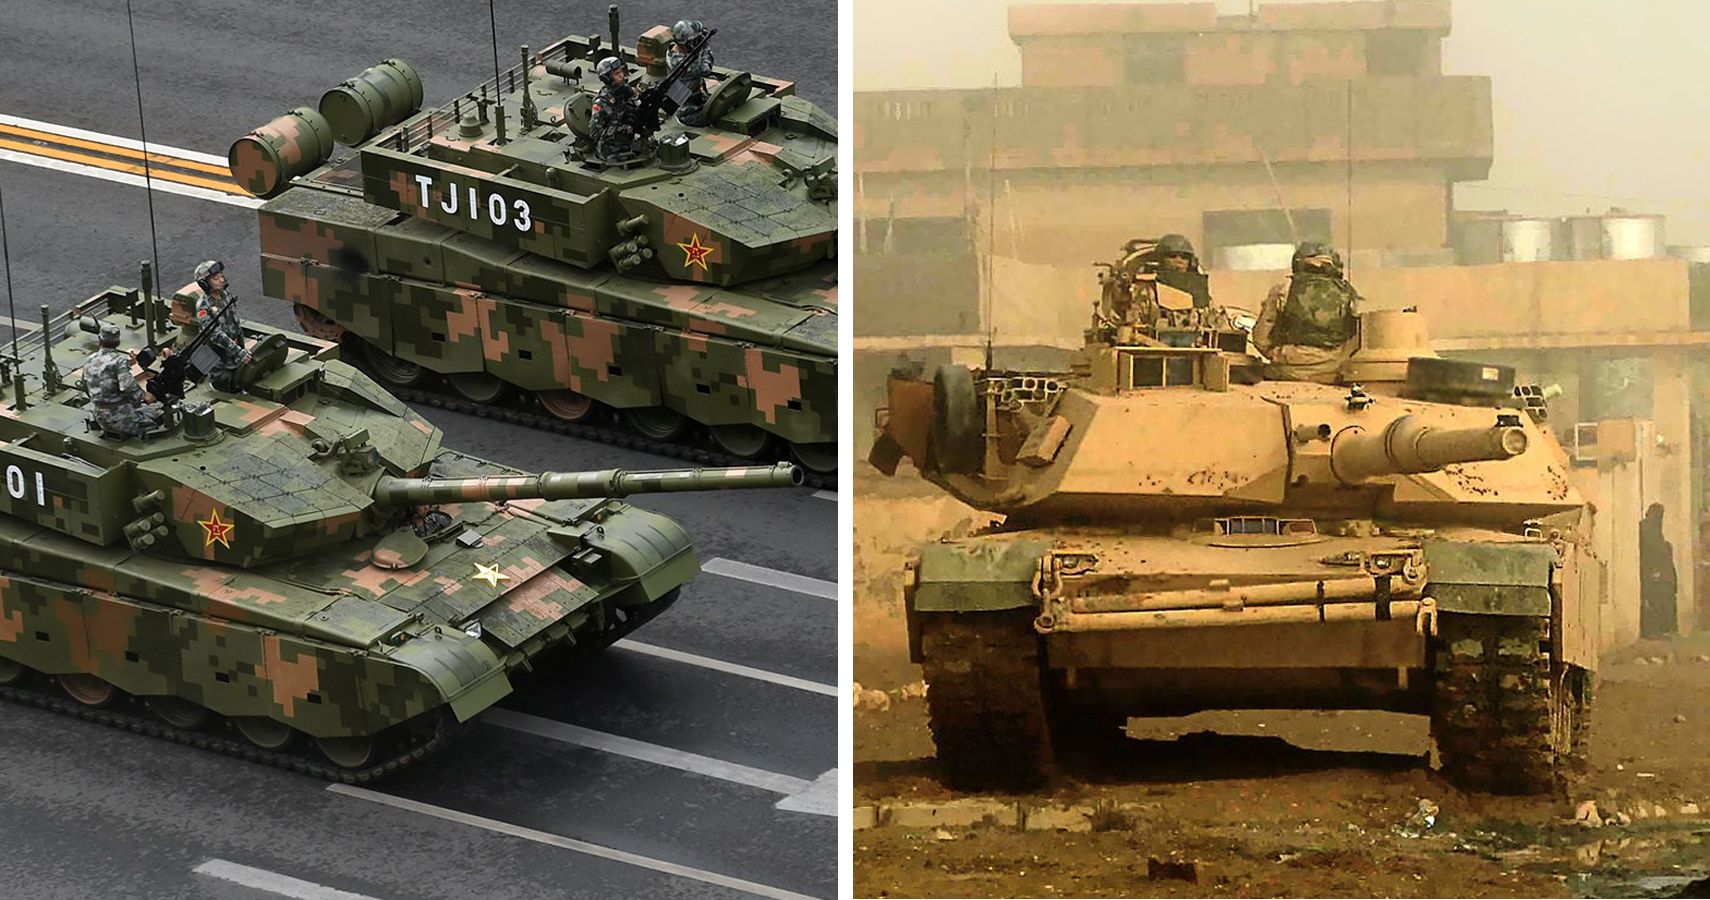 China T99 tanks on parade and US M1 Abrams tank in action